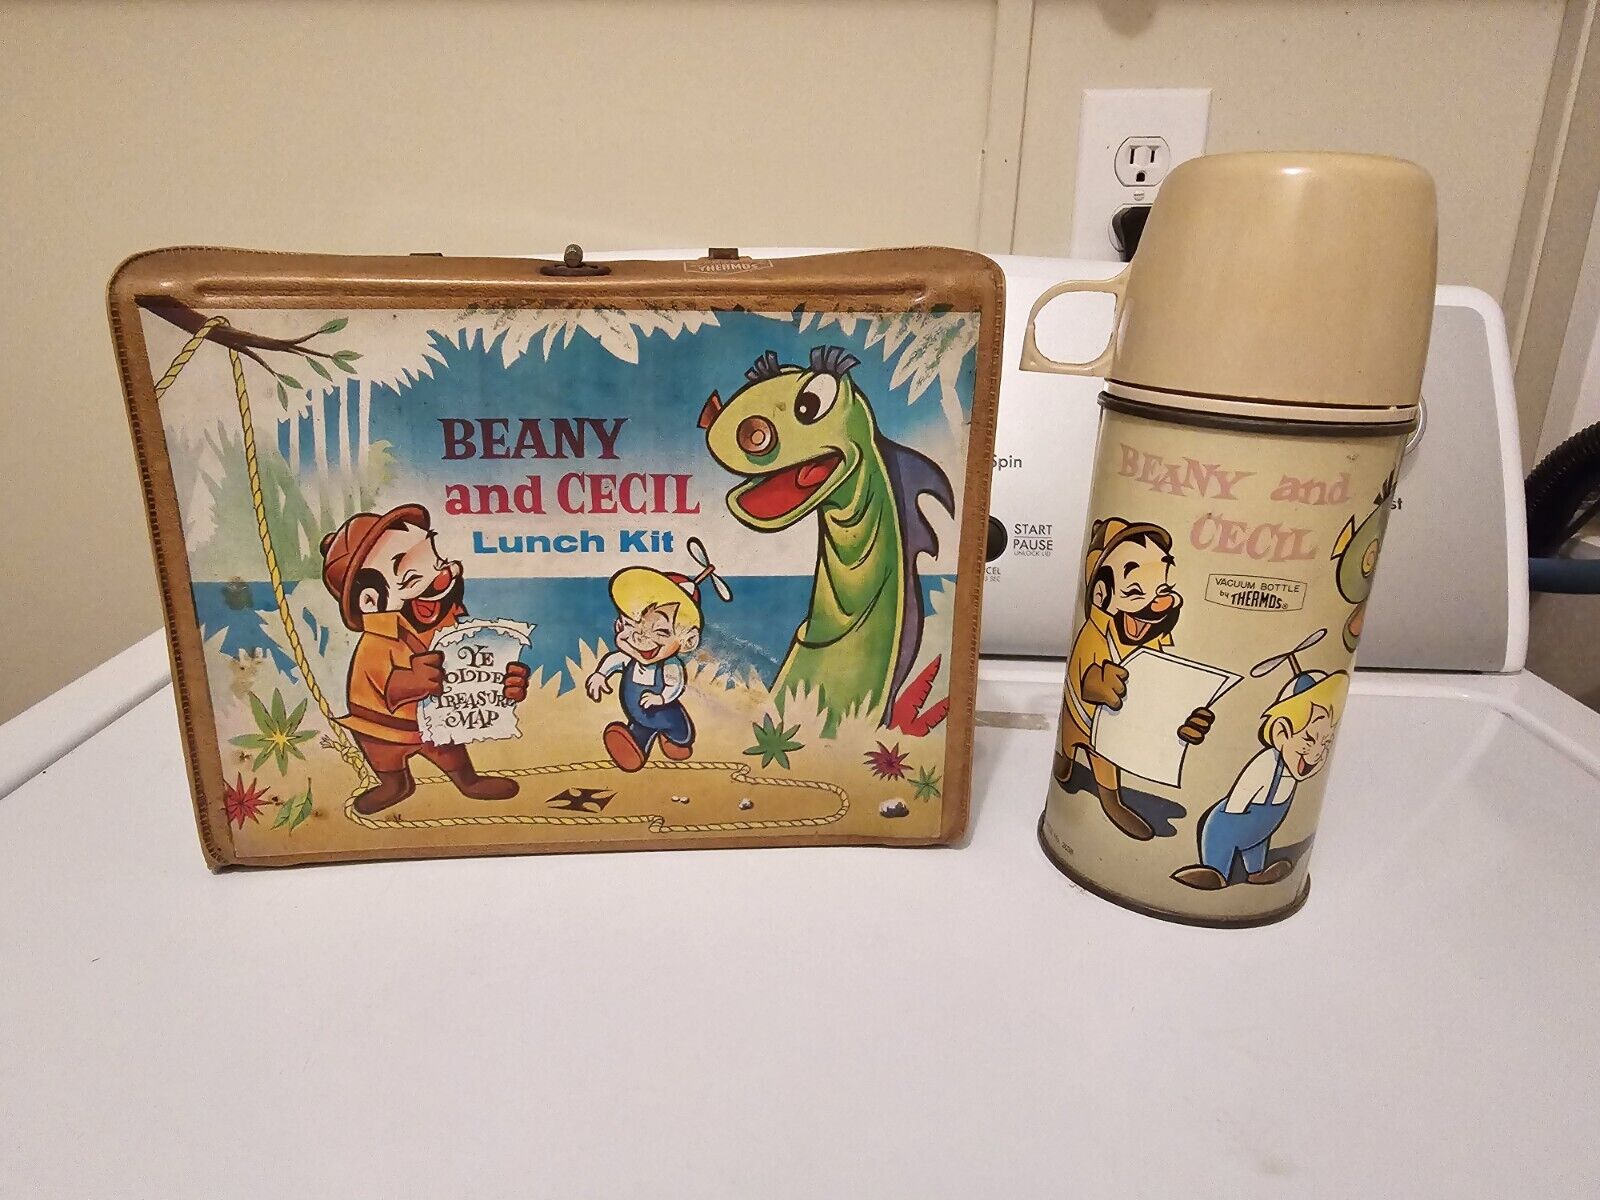 Vintage Beany And Cecil Lunchbox Tan with thermos, Rare 1963 Vinyl